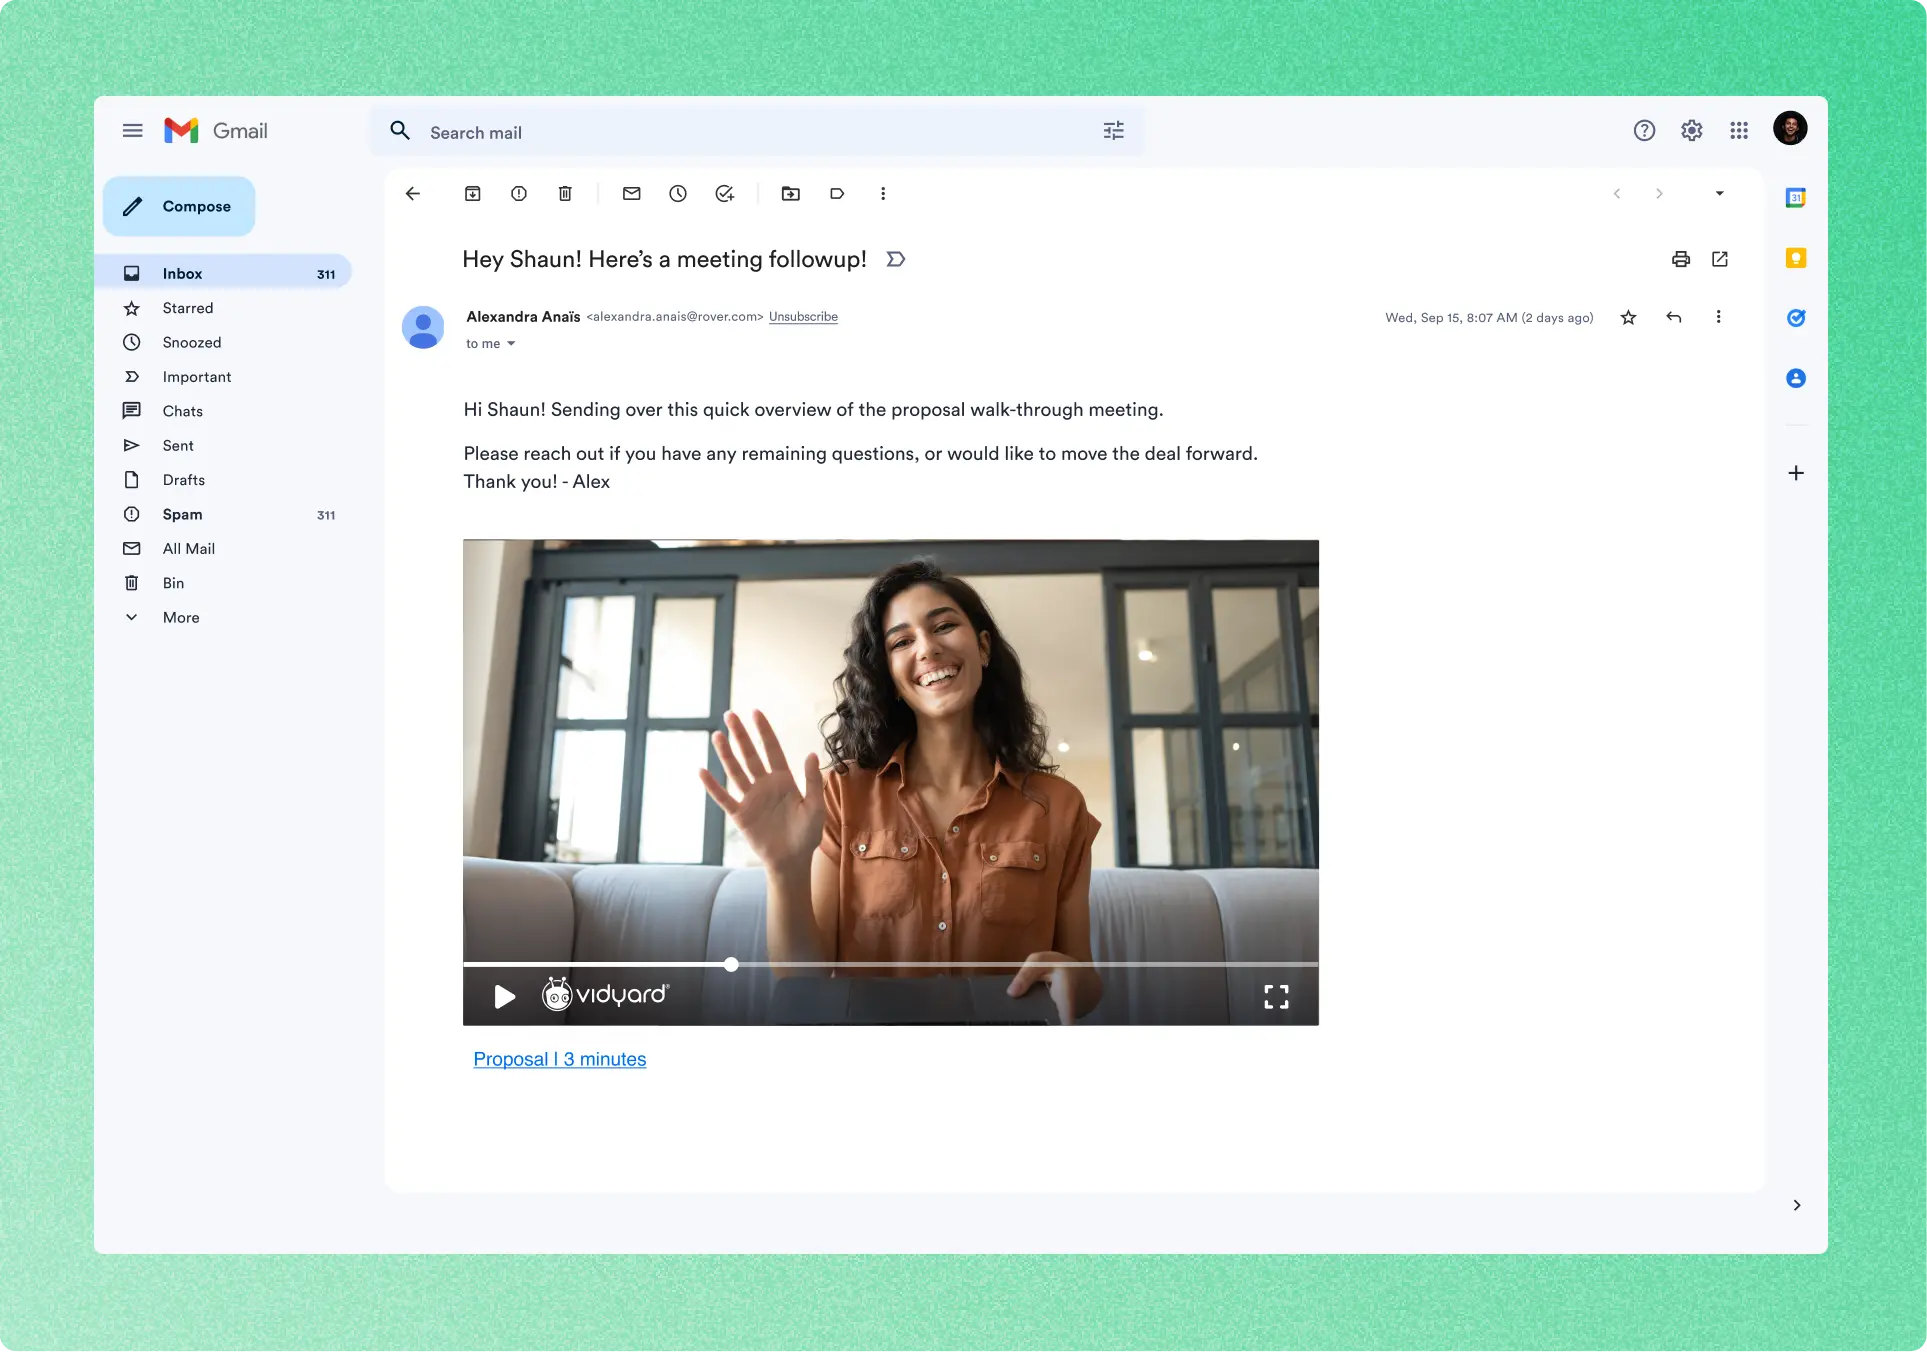 A screenshot of an email inside an email app. The email is from a salesperson, providing a quick overview of a proposal walk-through meeting. The email also contains a video labeled “Proposal | 3 minutes.” The video features a smiling, waving woman.